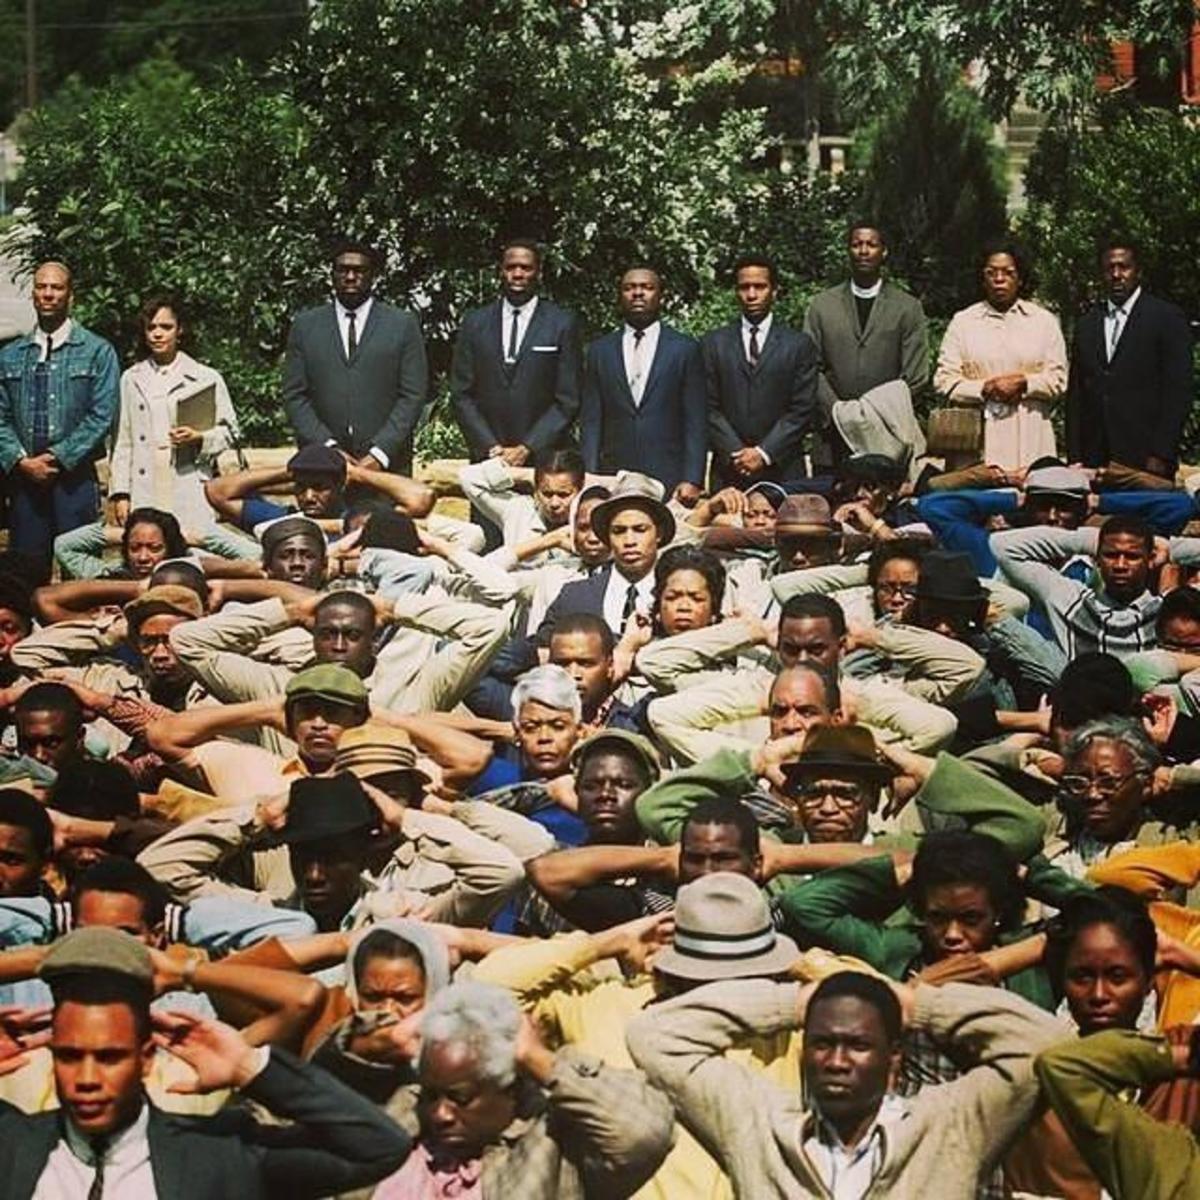 Troy in the cast from the Civil Rights movie on Martin Luther King and the march in, "Selma" with Oprah Winfrey. (That's Troy in the Green hat, center-left). 